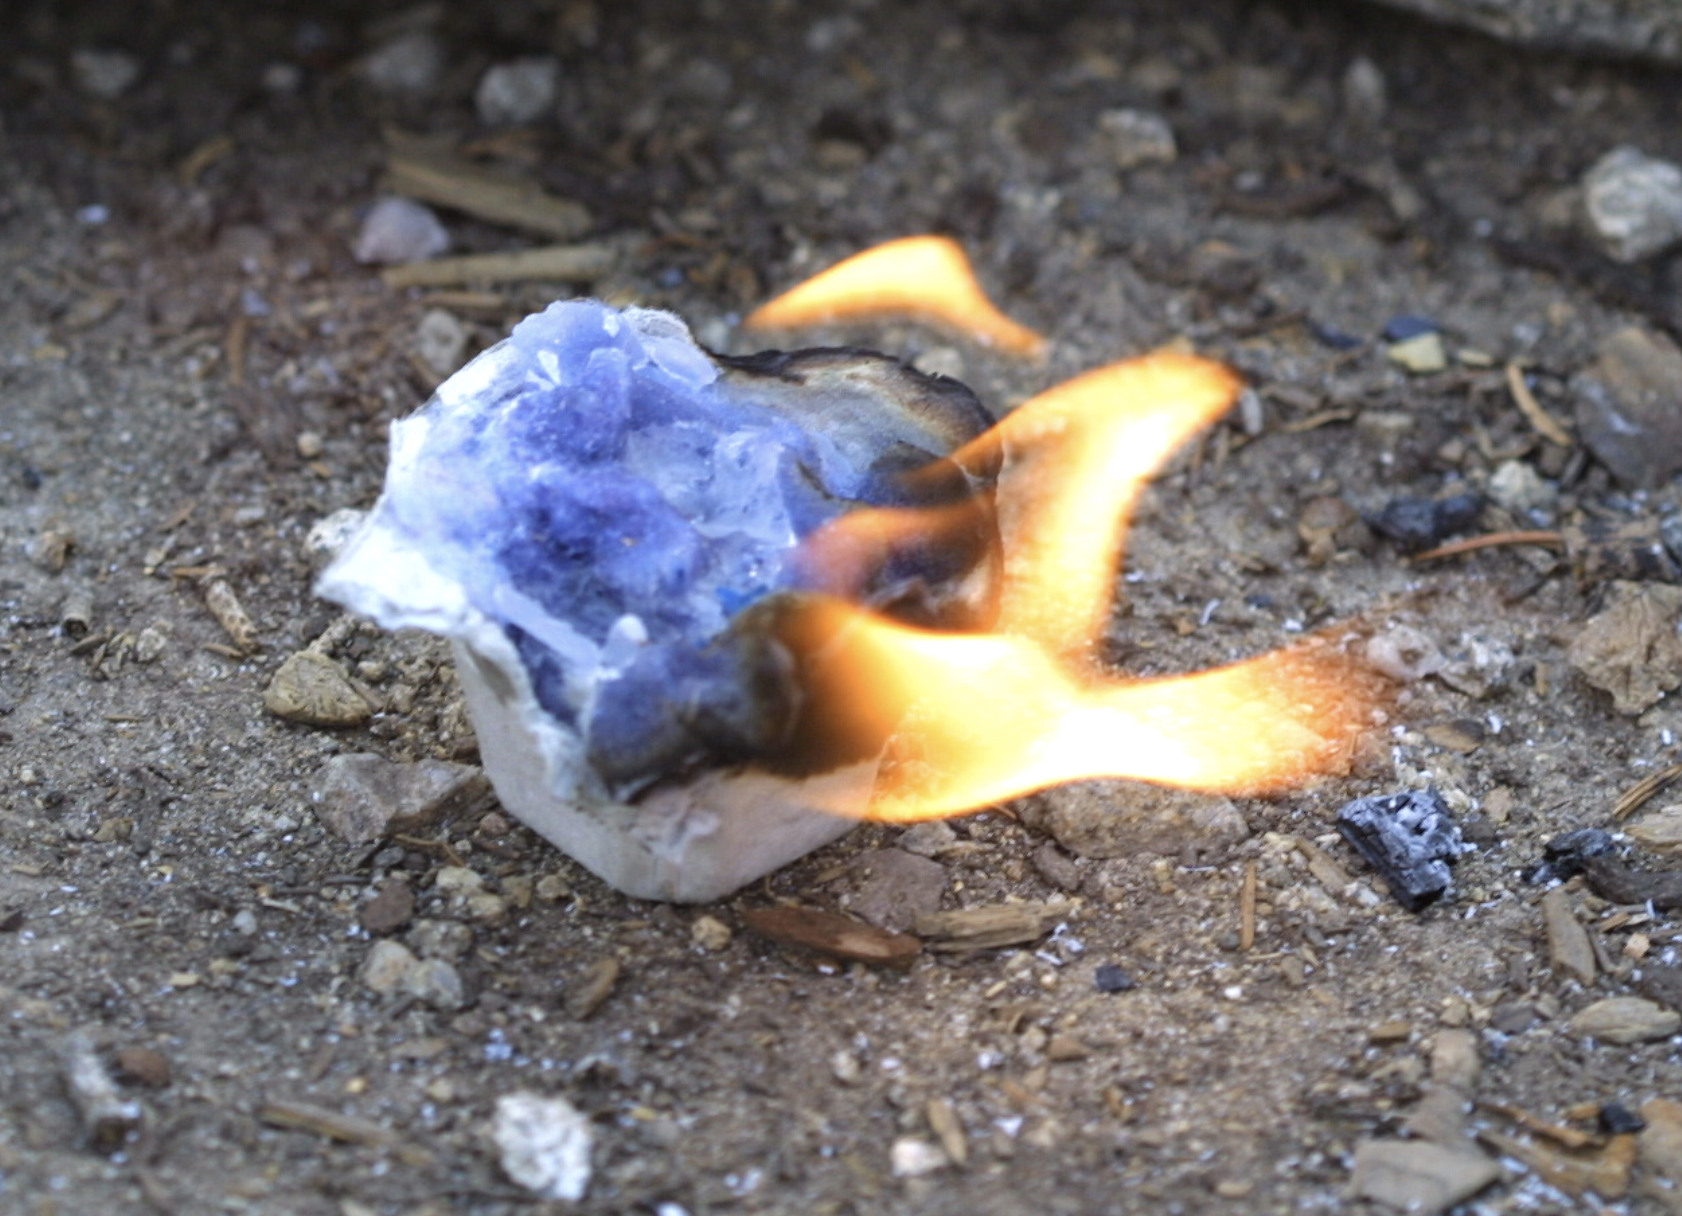 Sometimes tinder is hard to find in the outdoors. Use this DIY egg carton and dryer lint fire starter.